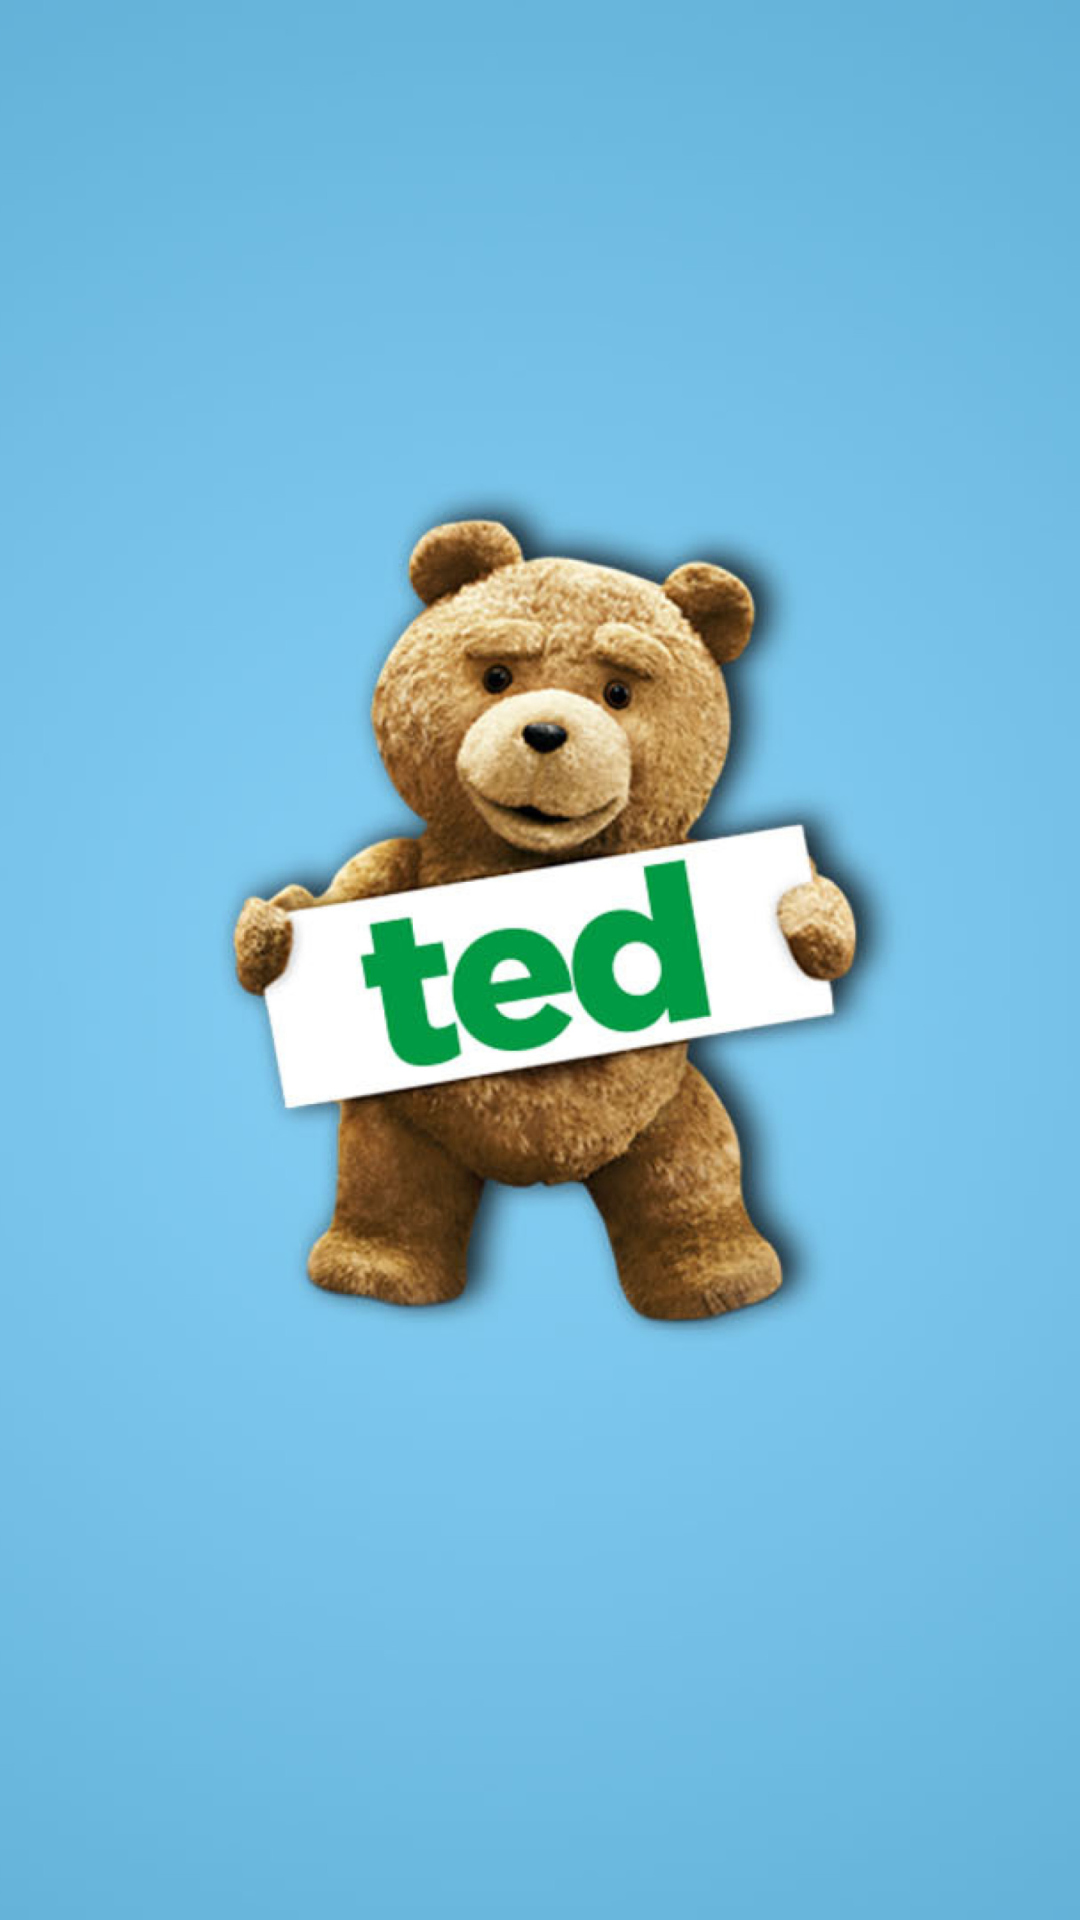 Ted wallpaper 1080x1920